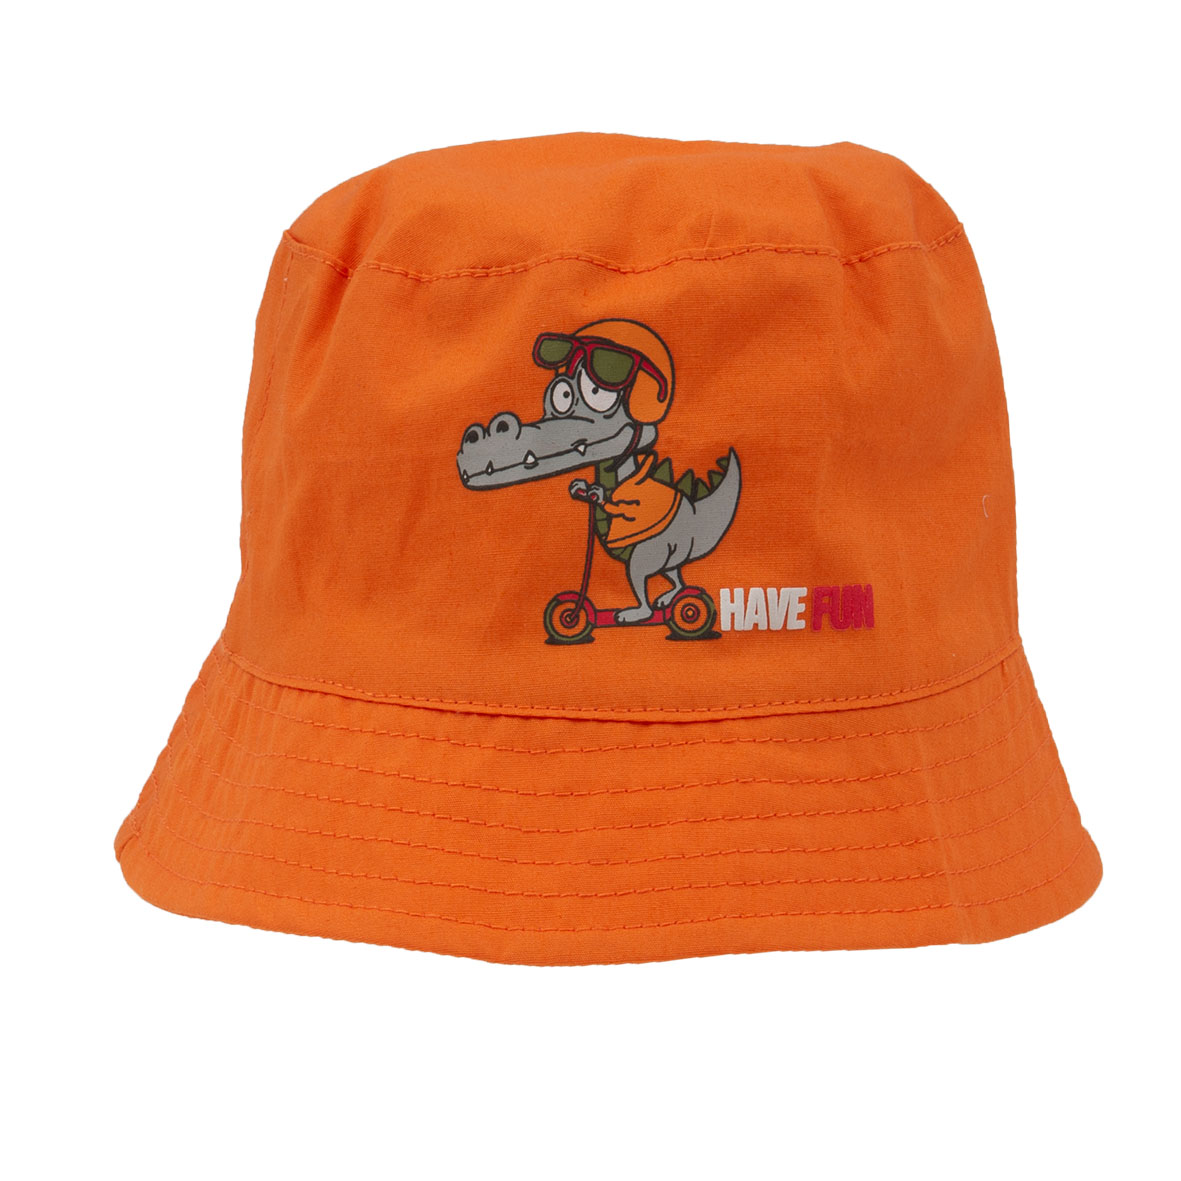 Mawi cappello  stampa dino - Mawi